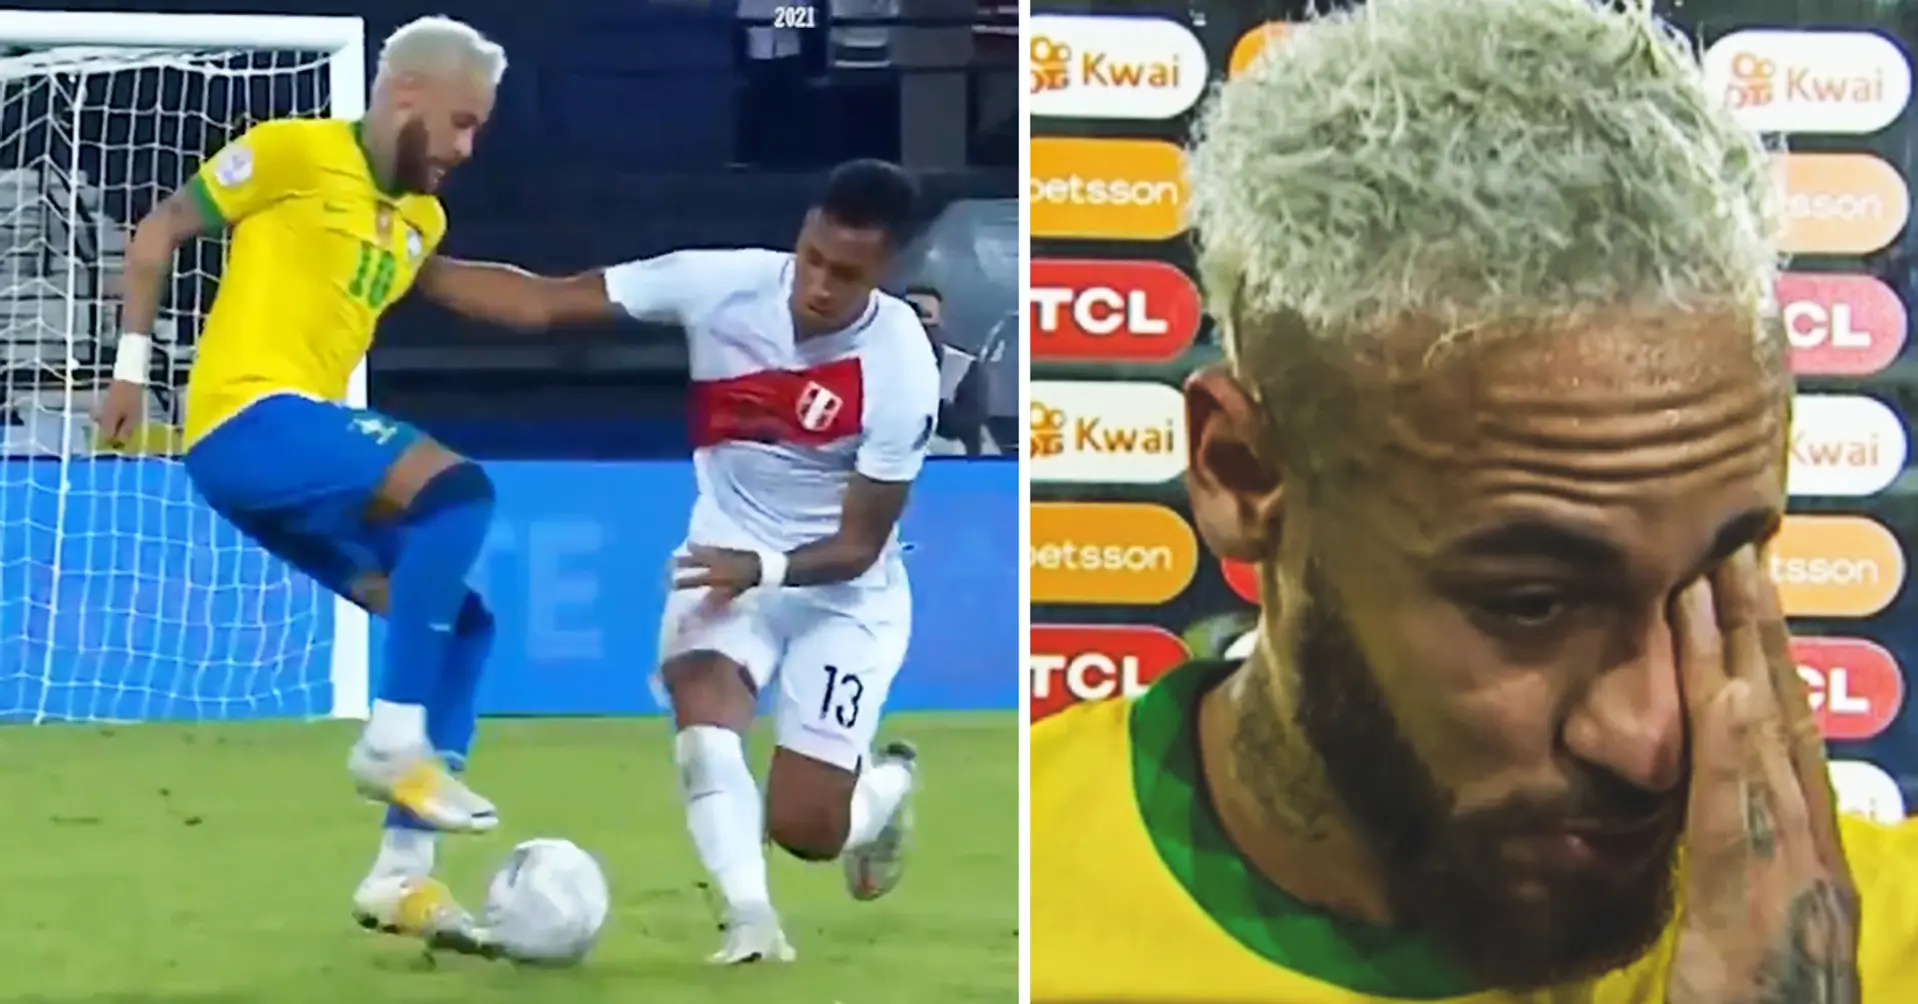 Neymar embarrasses Peru players with incredible Samba Skills, cries after the game